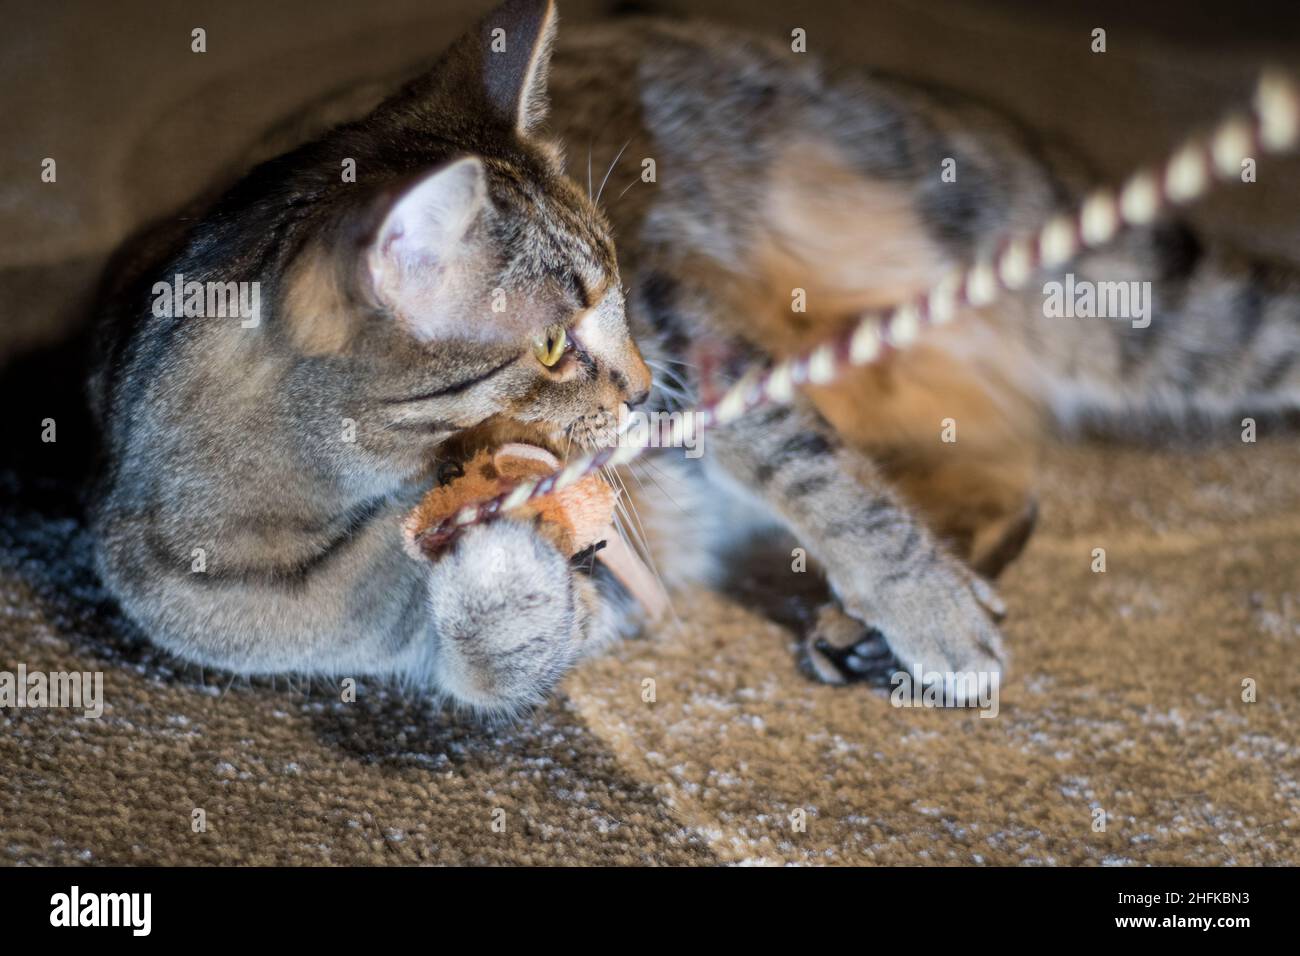 Kitten at play with a cat toy Stock Photo